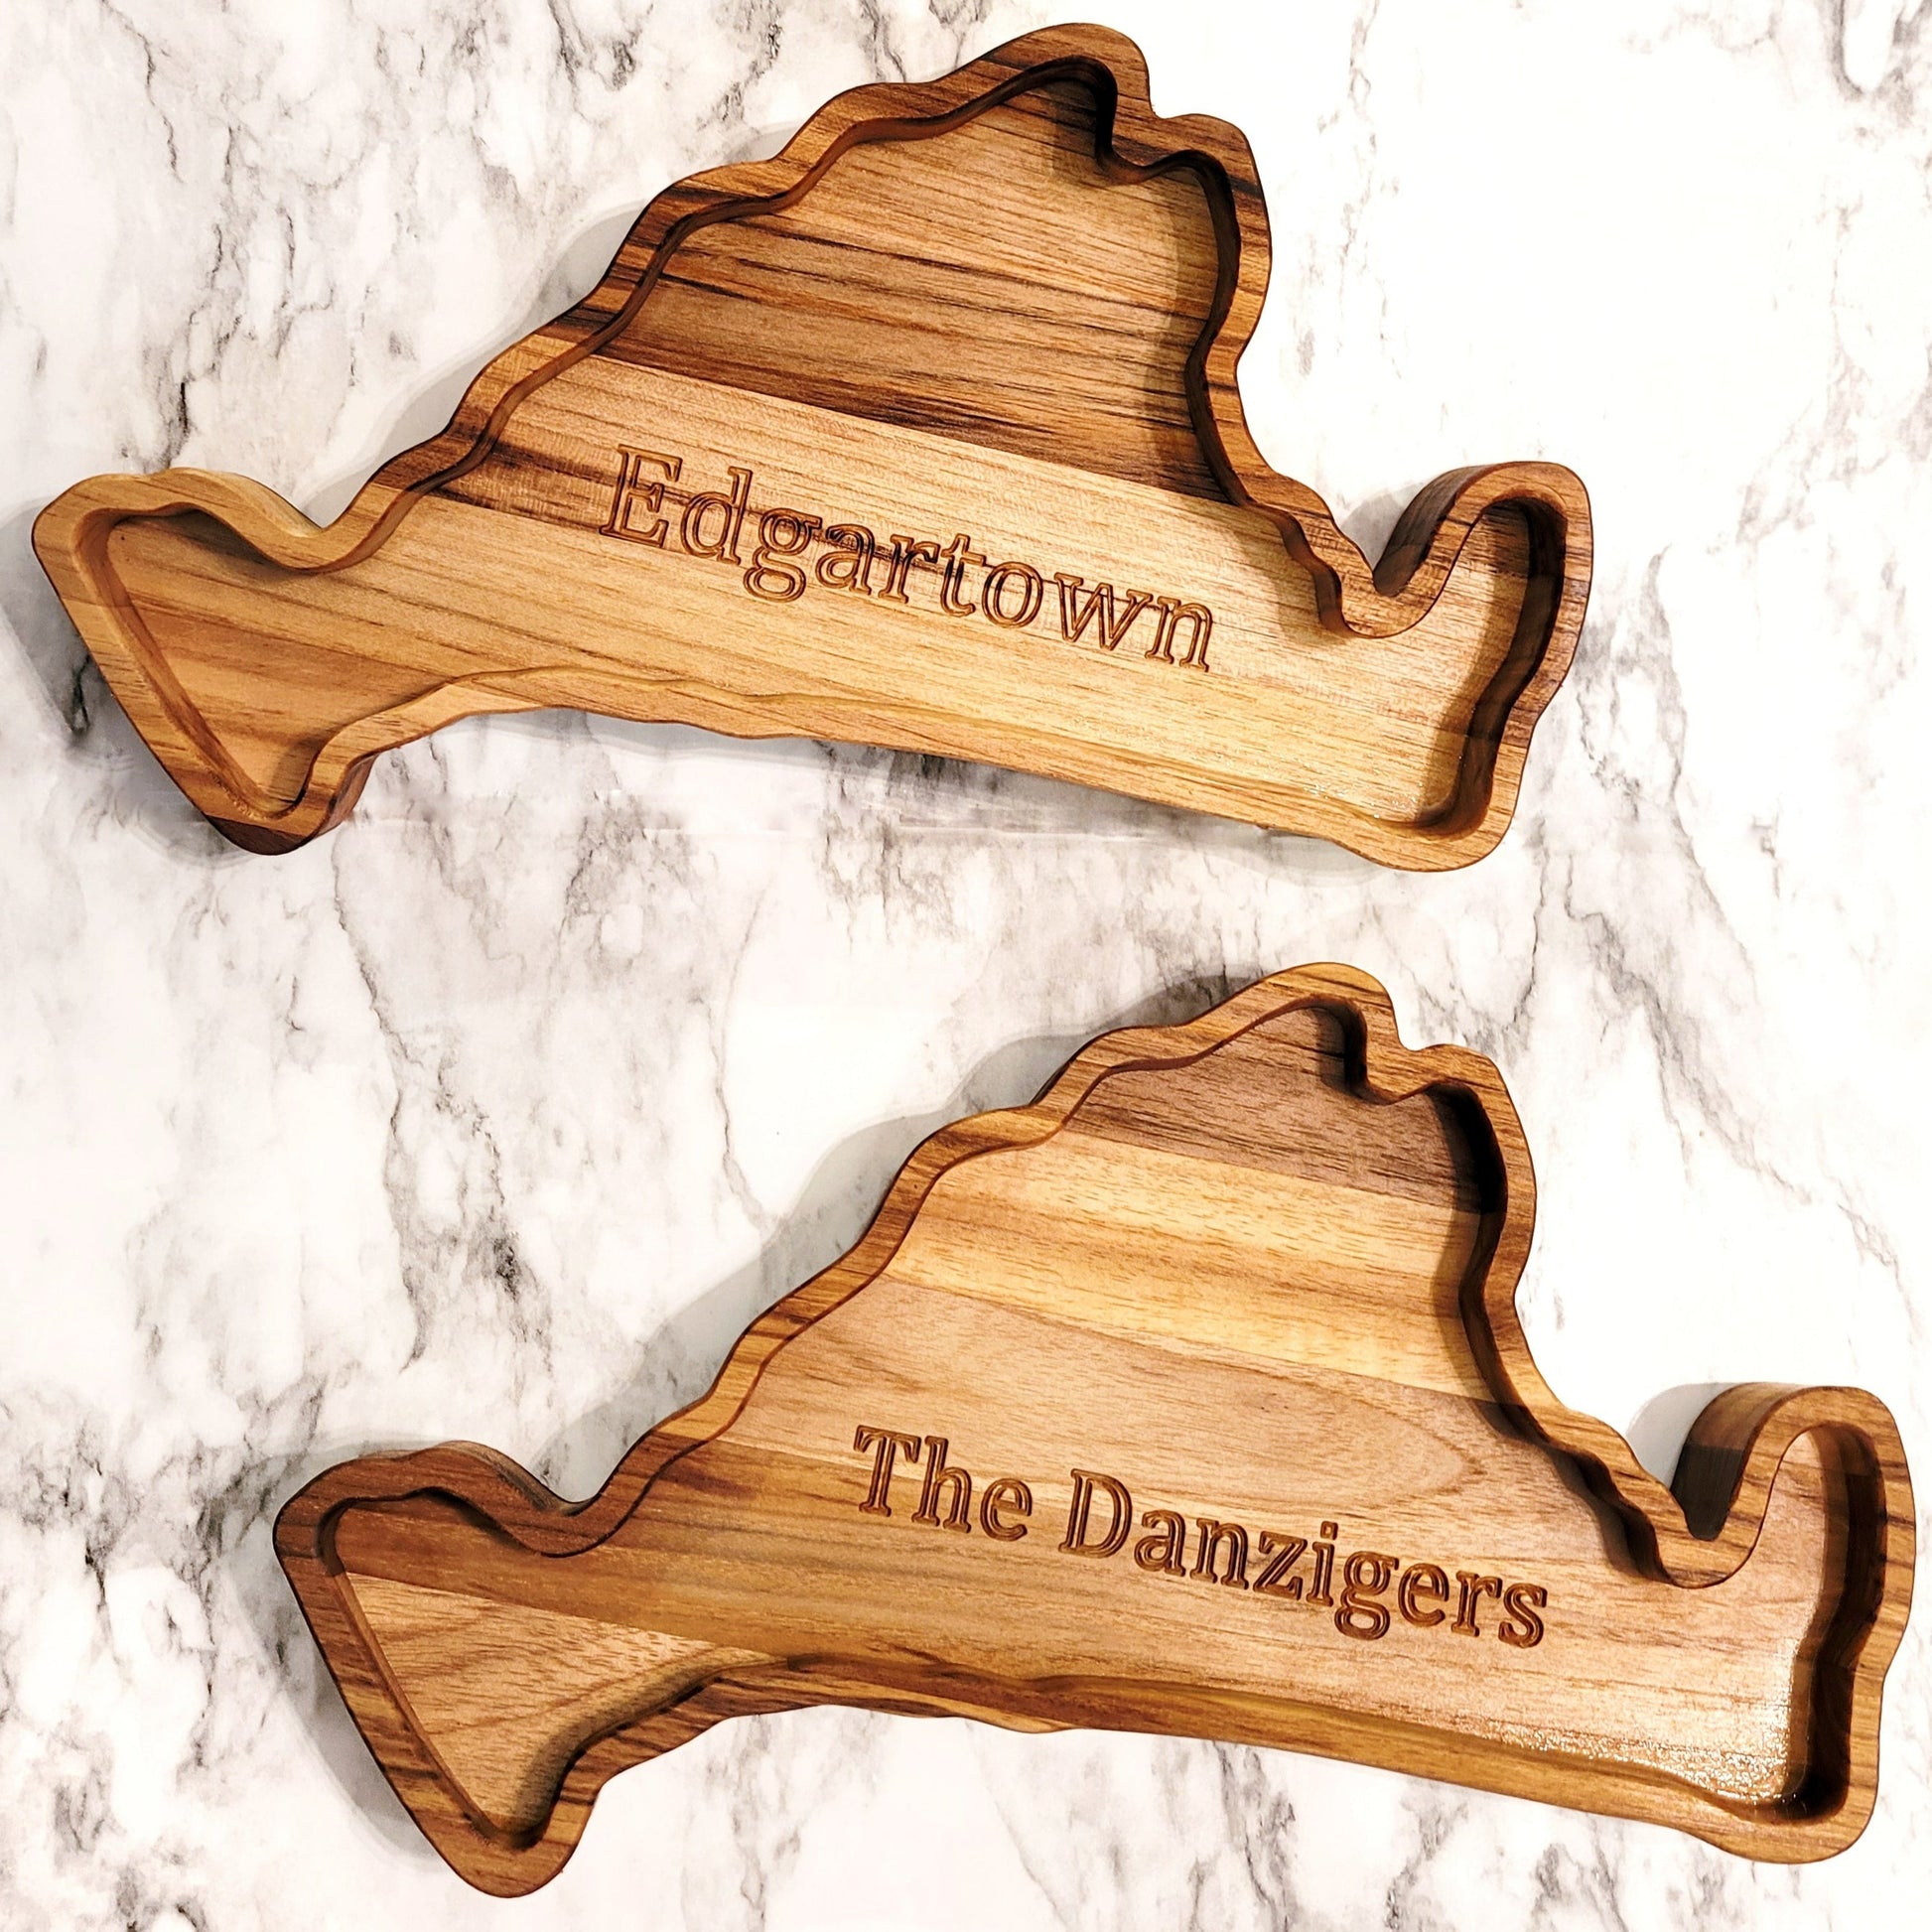 Two Martha's Vineyard charcuterie boards, one personalized with Edgartown and the other with a family's last name